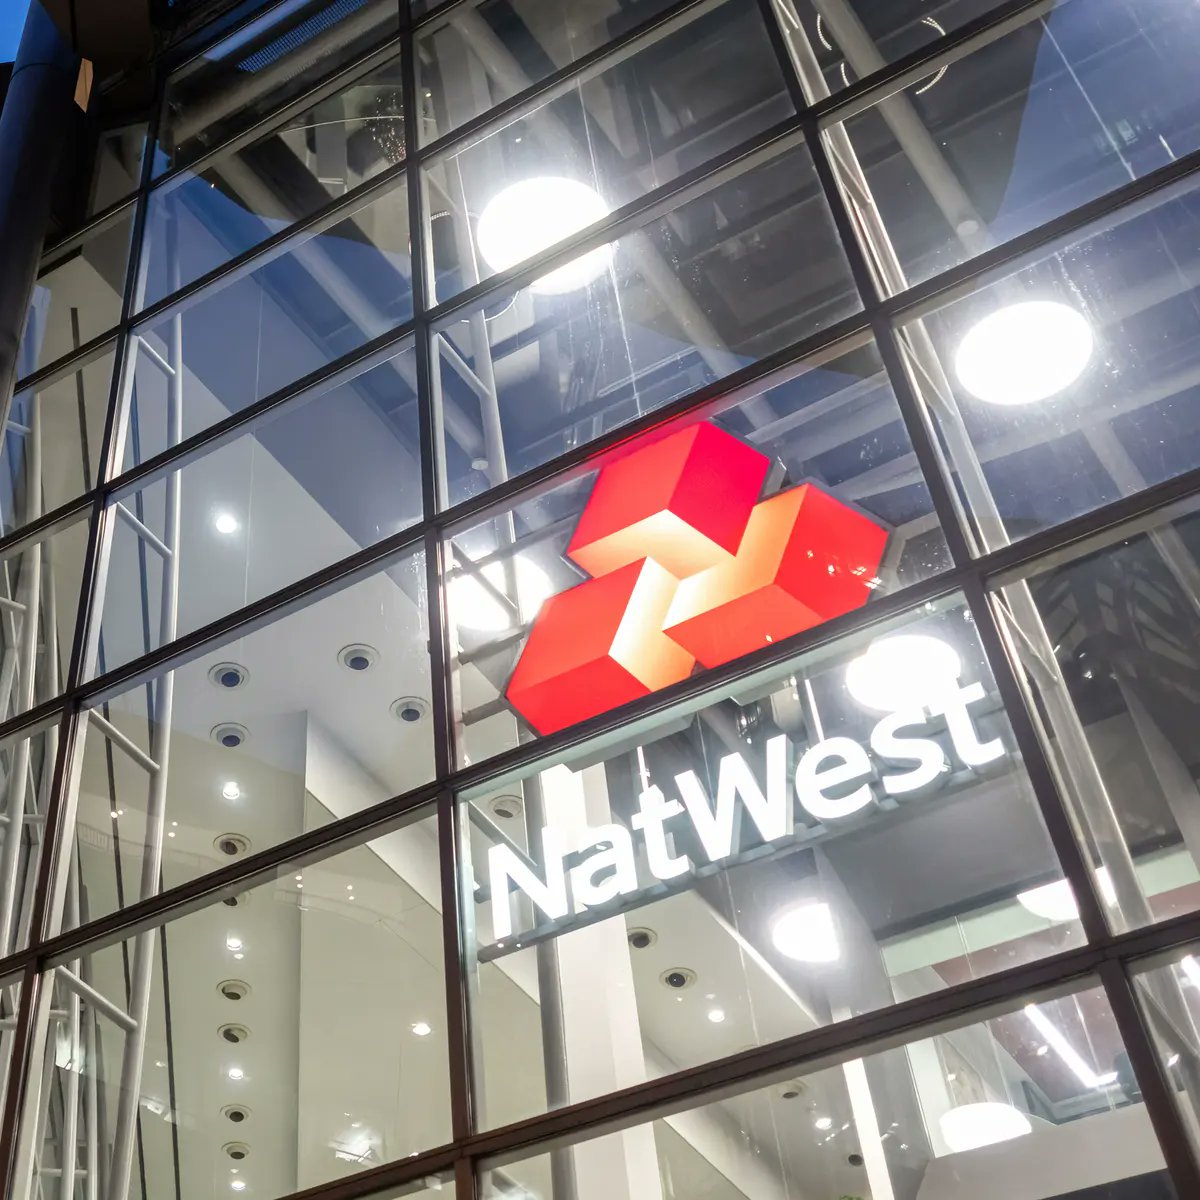 Founders of interior design school sue #NatWest, alleging the bank falsely said that it was trying to save their commercial property business when, in reality, it trying to seize its assets at below market value #GlobalRestructuringGroup law360.com/commercial-lit…